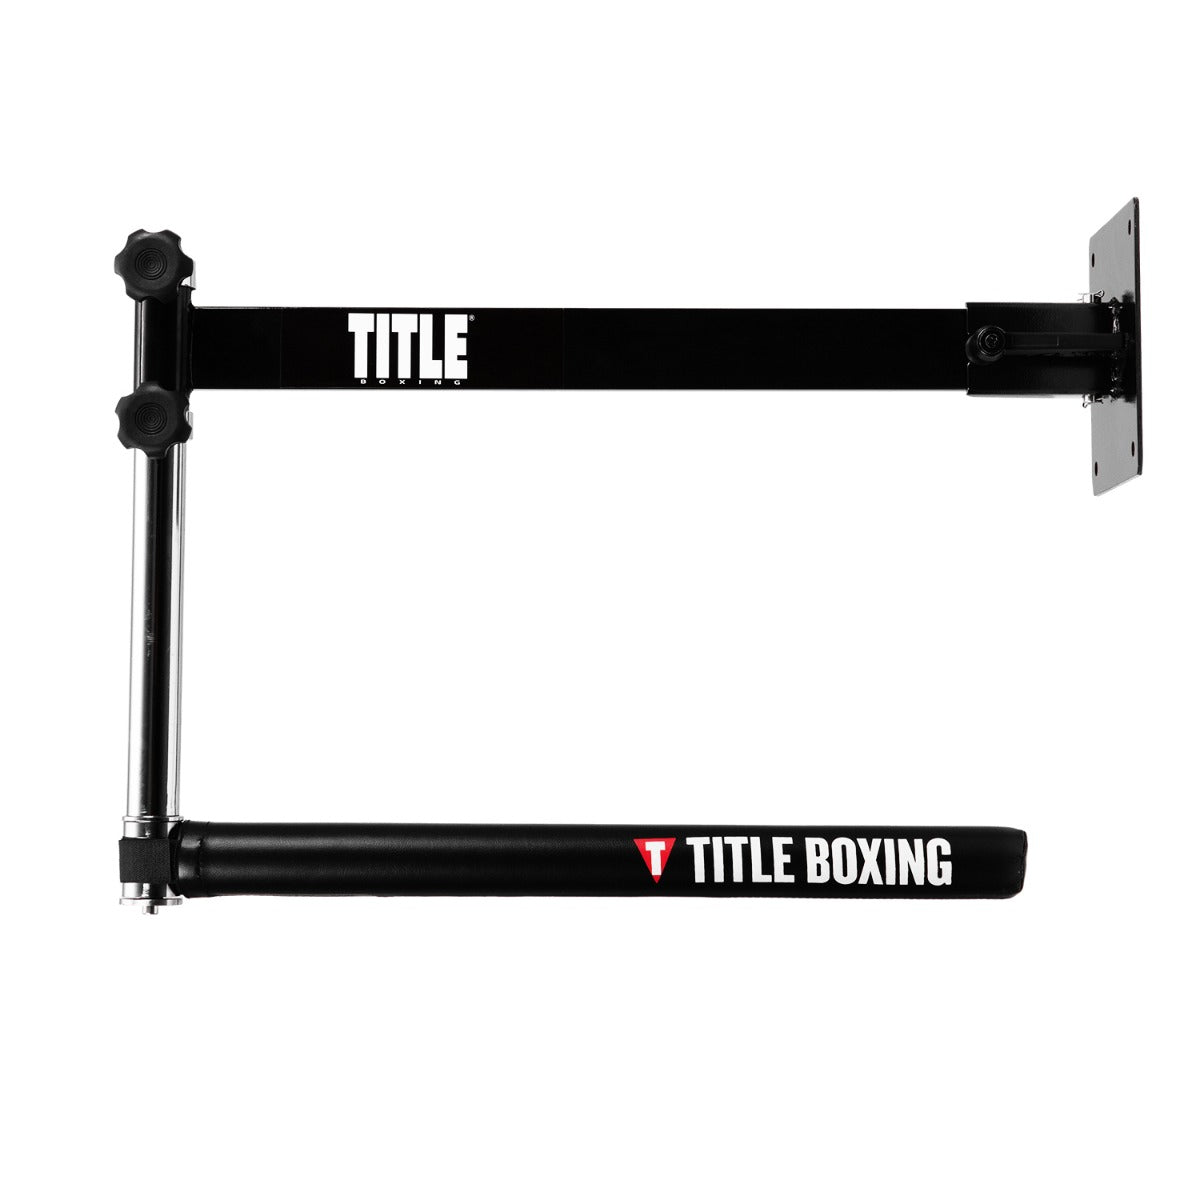 Title Boxing Rapid-Reflex Boxing Bar Tri-Bag Opinion, OutdoorFull.com